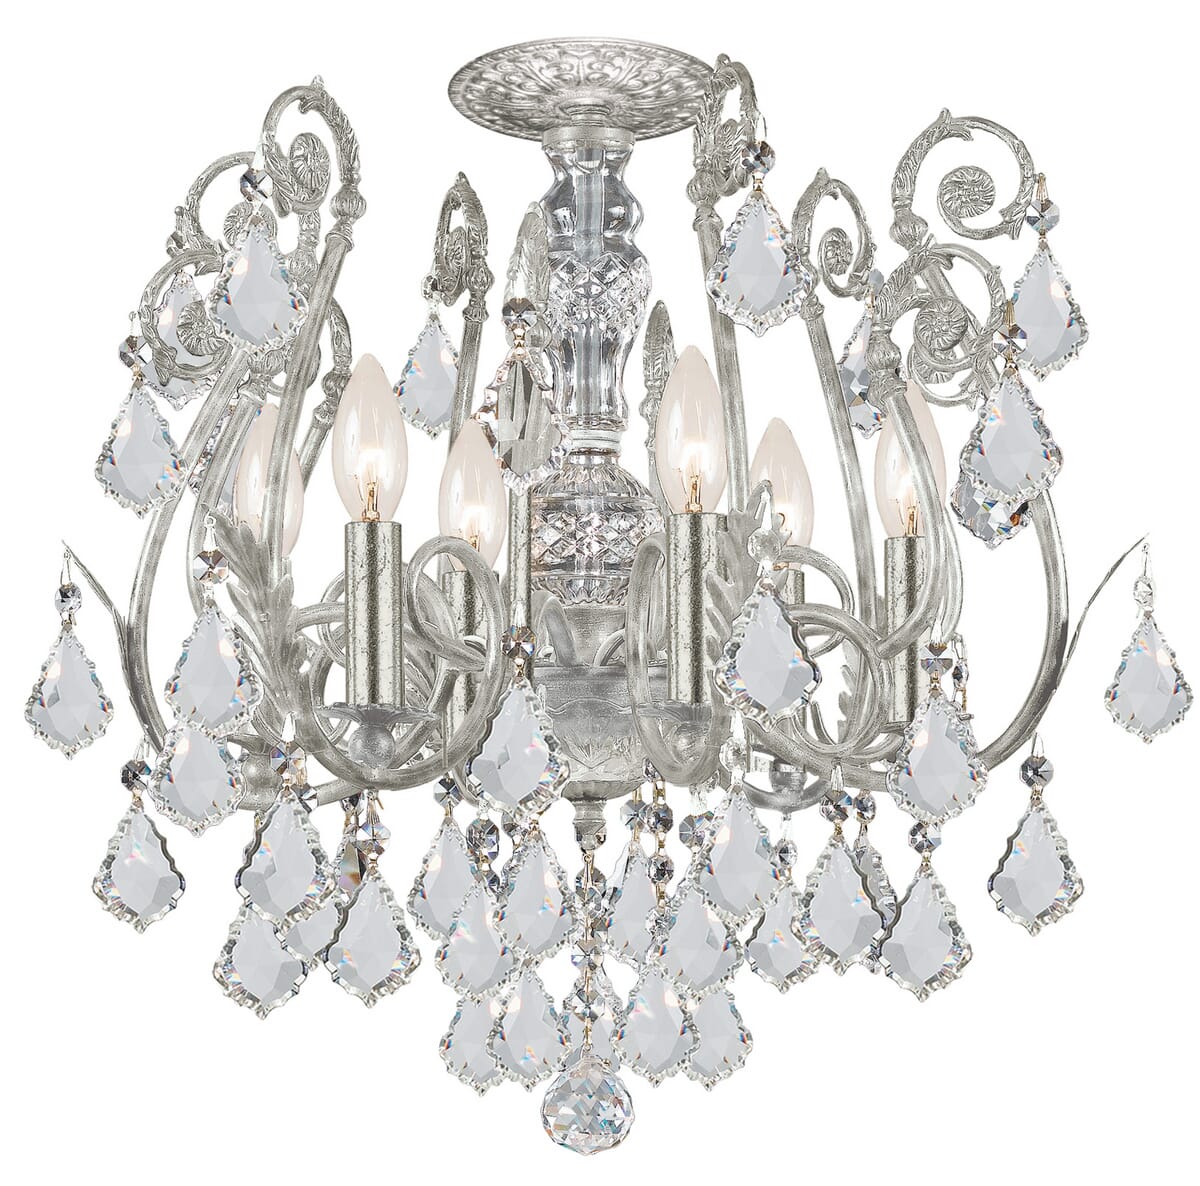 Regis 6-Light 20"" Ceiling Light in Olde Silver with Clear Swarovski Strass Crystals -  Crystorama, 5115-OS-CL-S